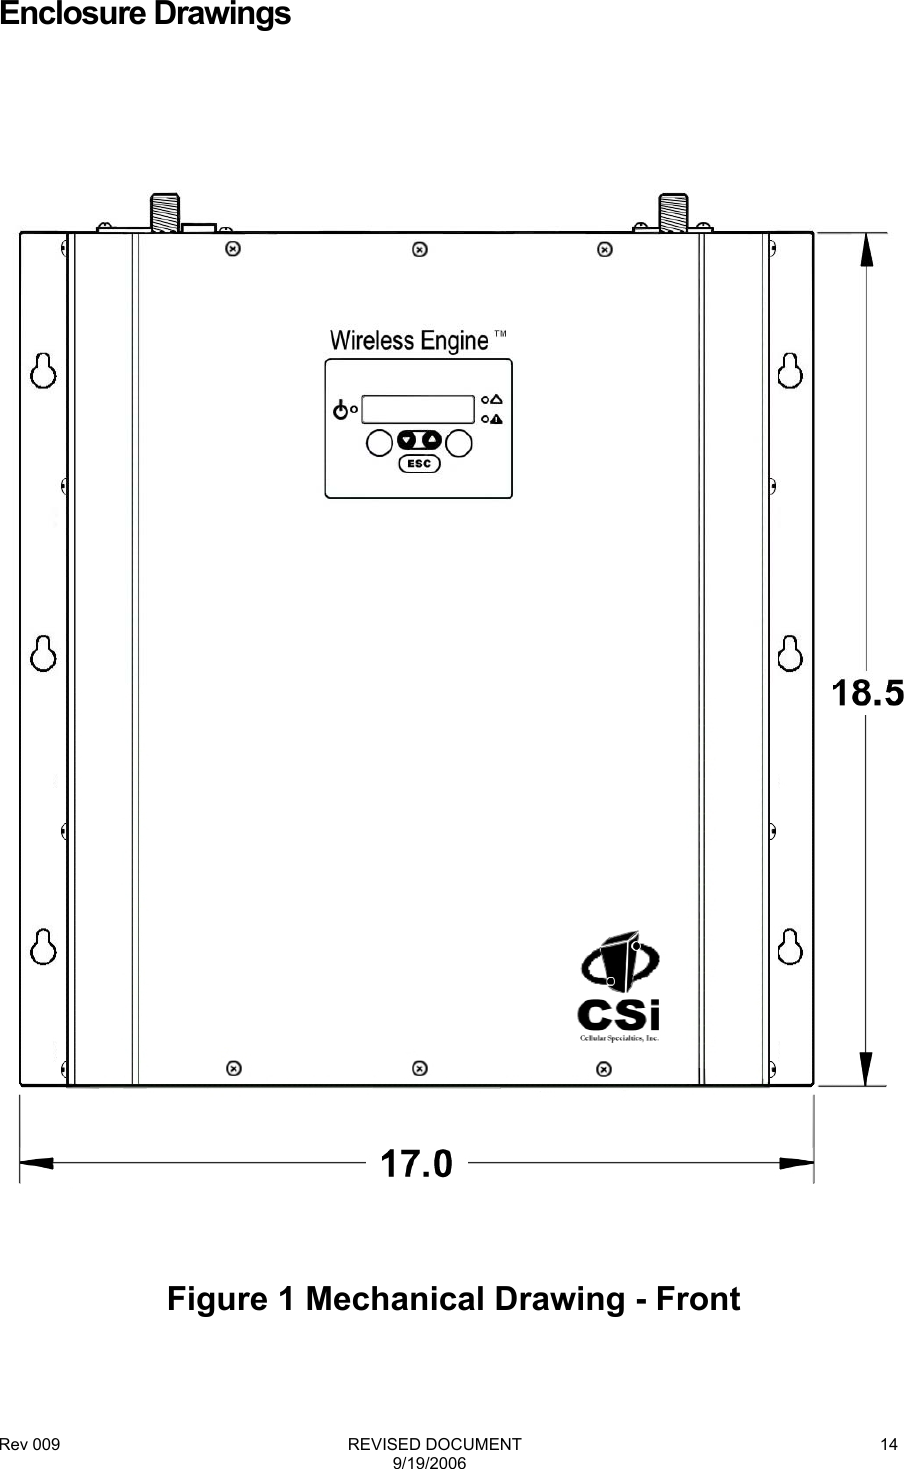 Rev 009                                                              REVISED DOCUMENT 9/19/2006 14  Enclosure Drawings          Figure 1 Mechanical Drawing - Front 